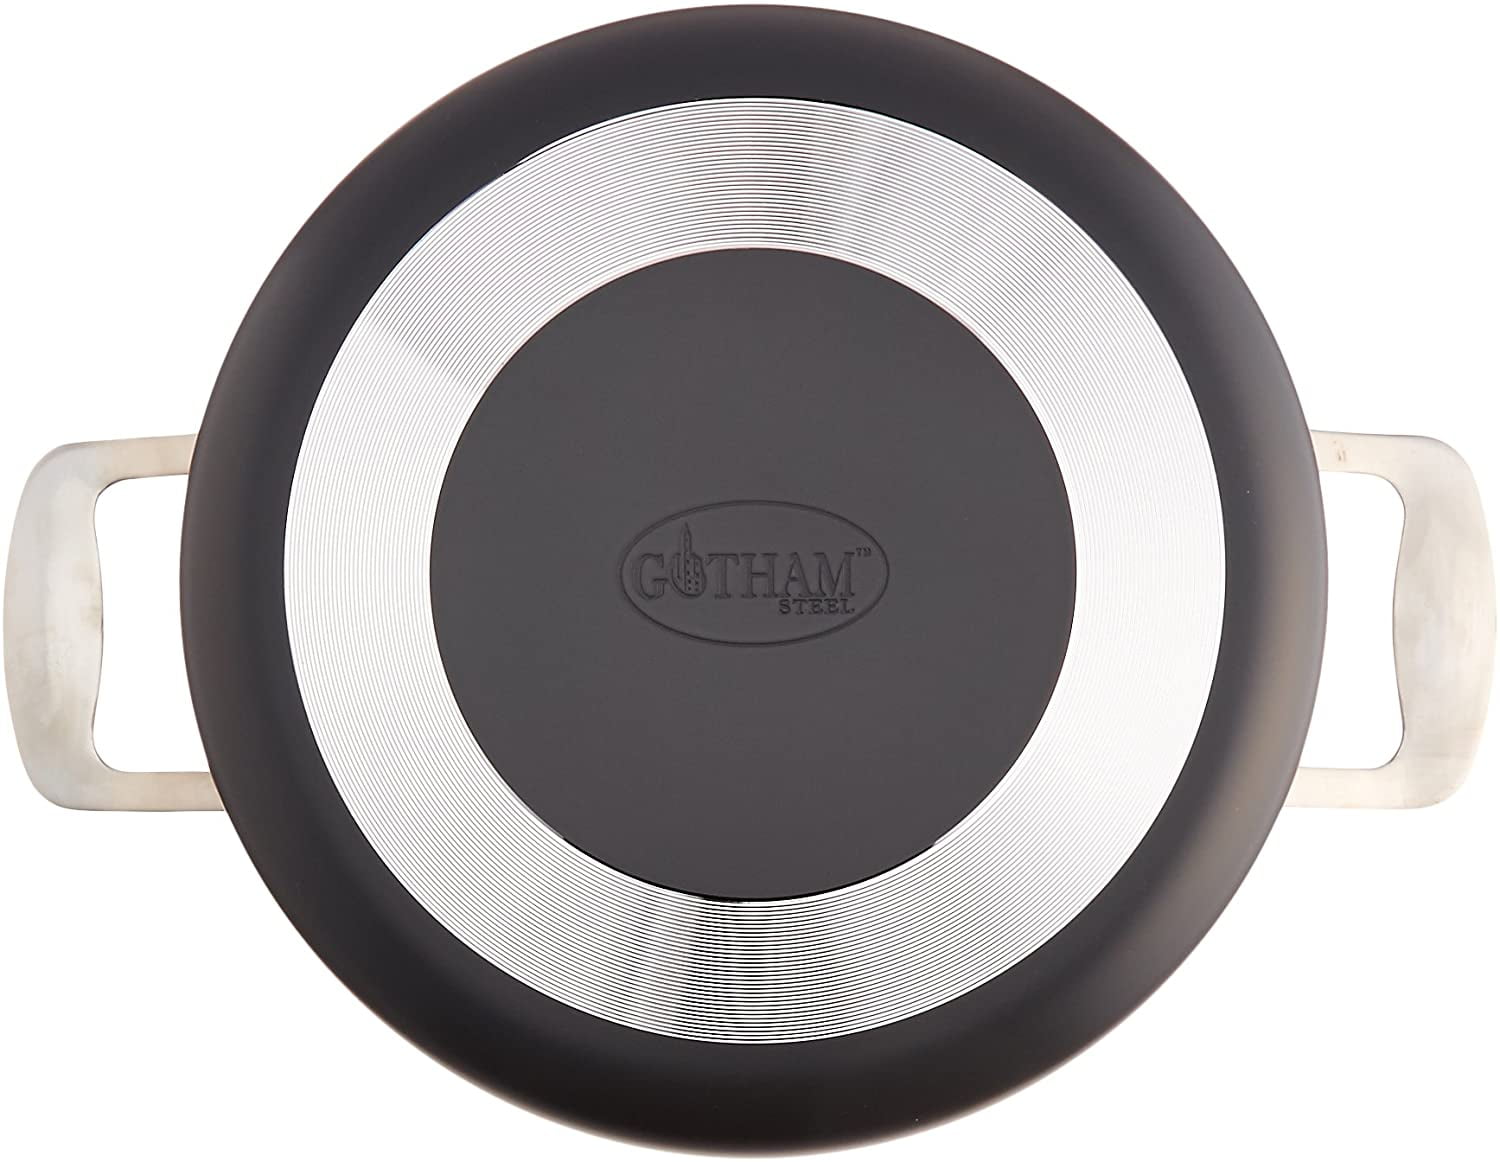 Gotham Steel Reviews  Is Steel Cookware Safer? – Illuminate Labs